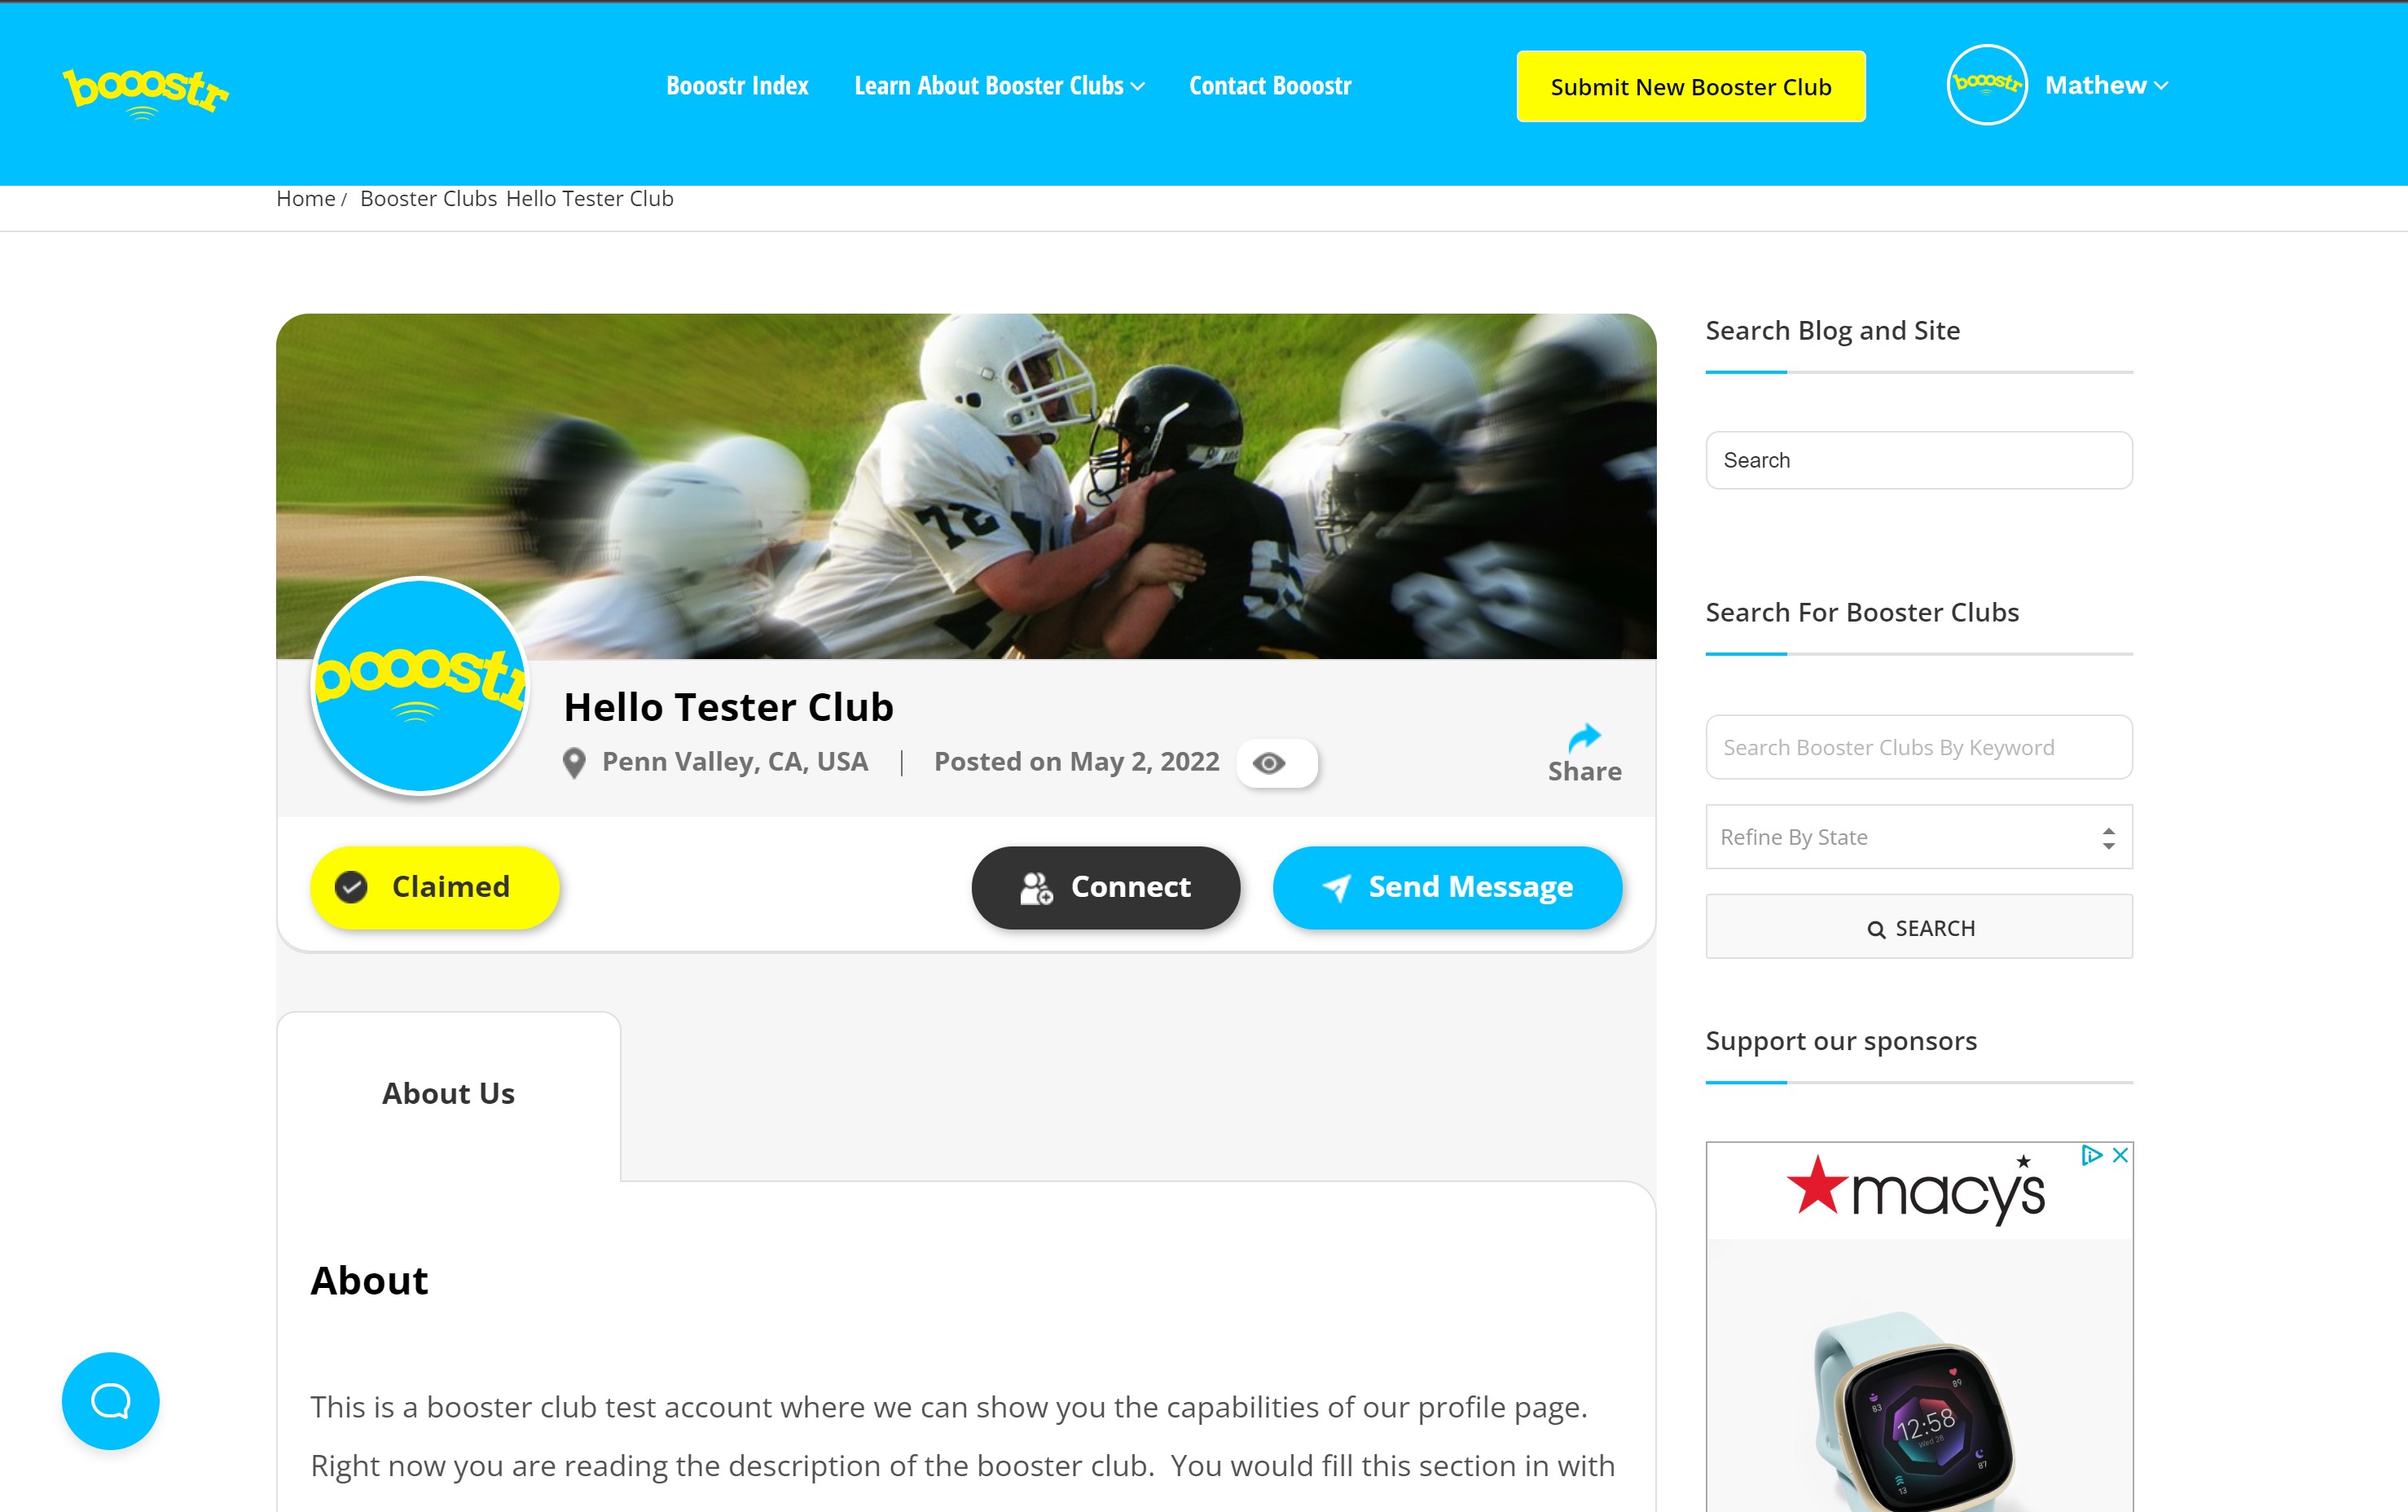 Booster club and/or nonprofit public profile page on Booostr.